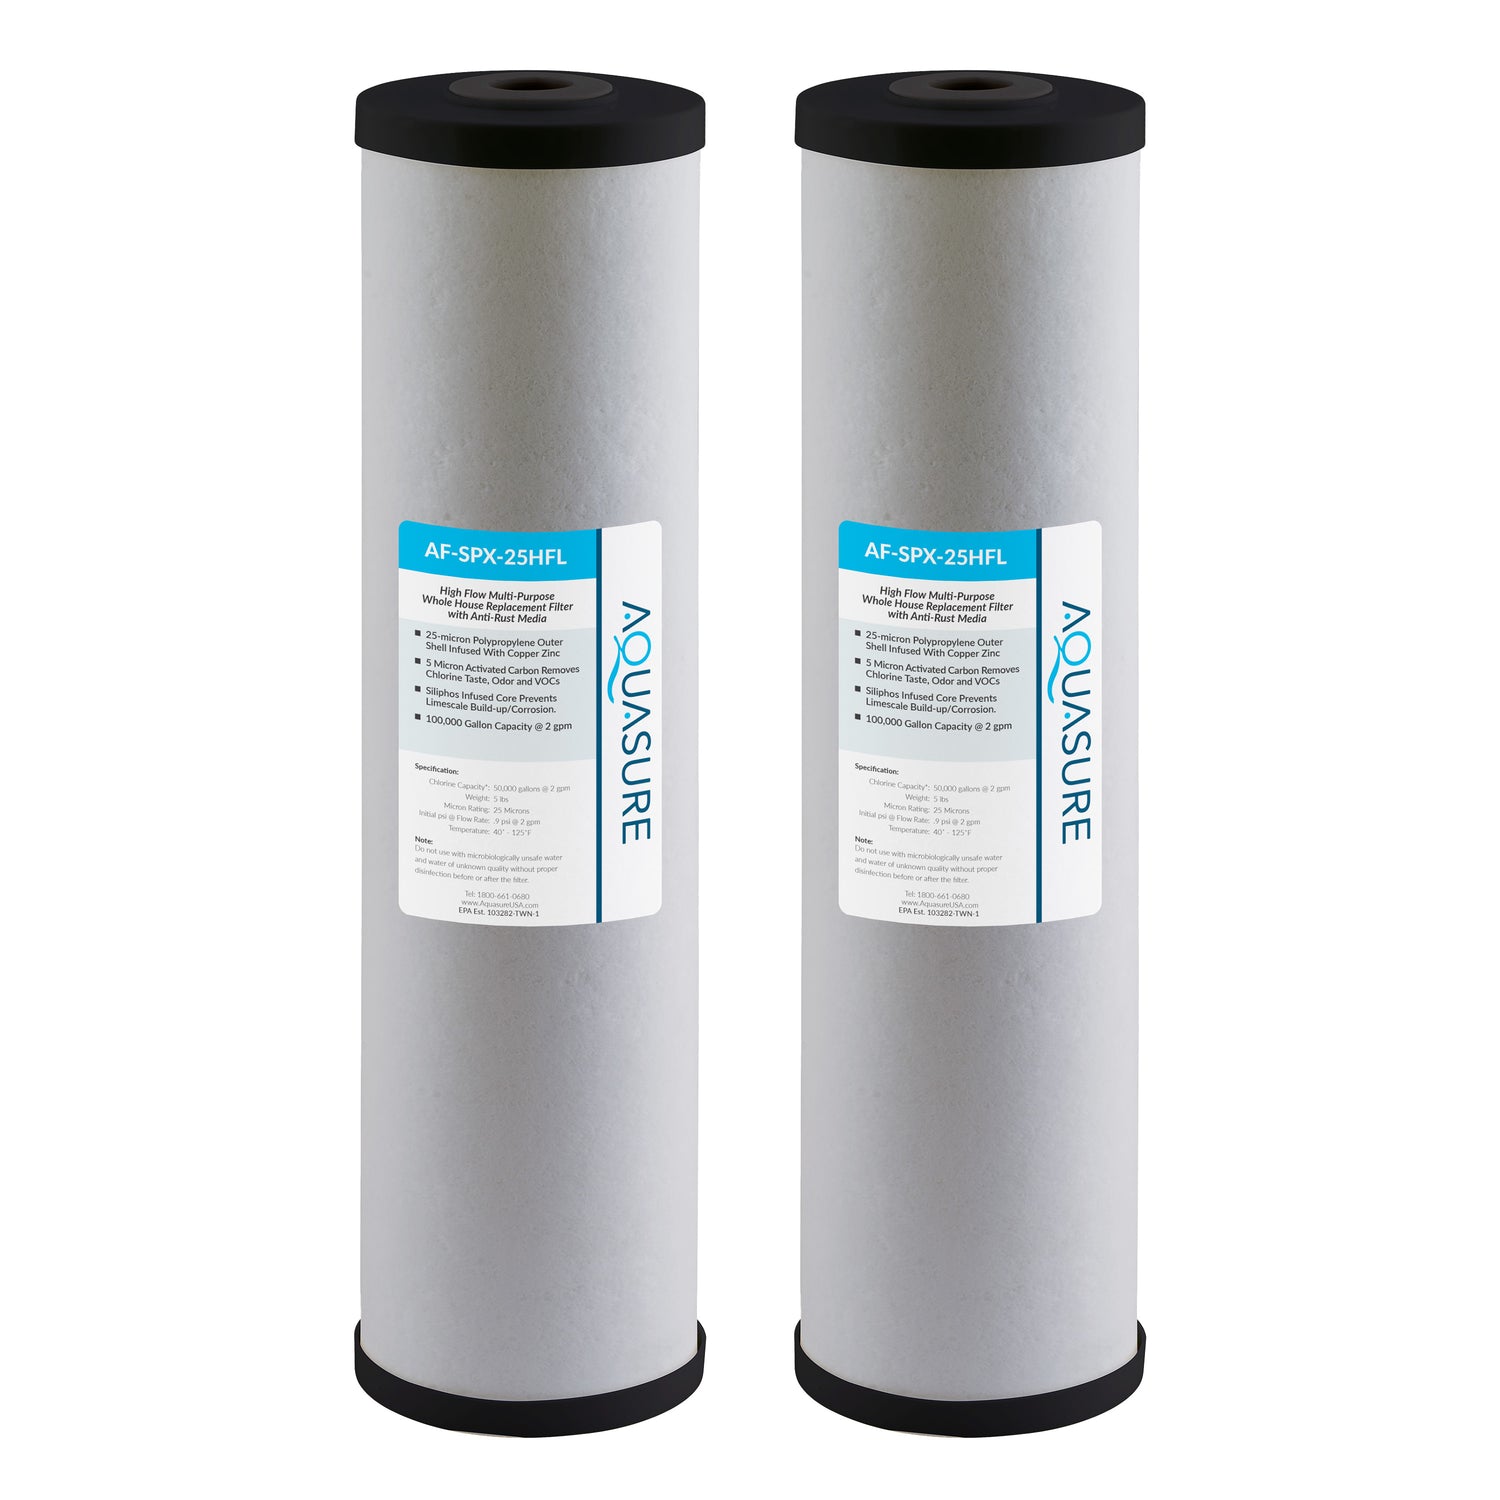 Fortitude V2 Multi-Purpose Replacement Filter Cartridge with Siliphos - Large (2-Pack)